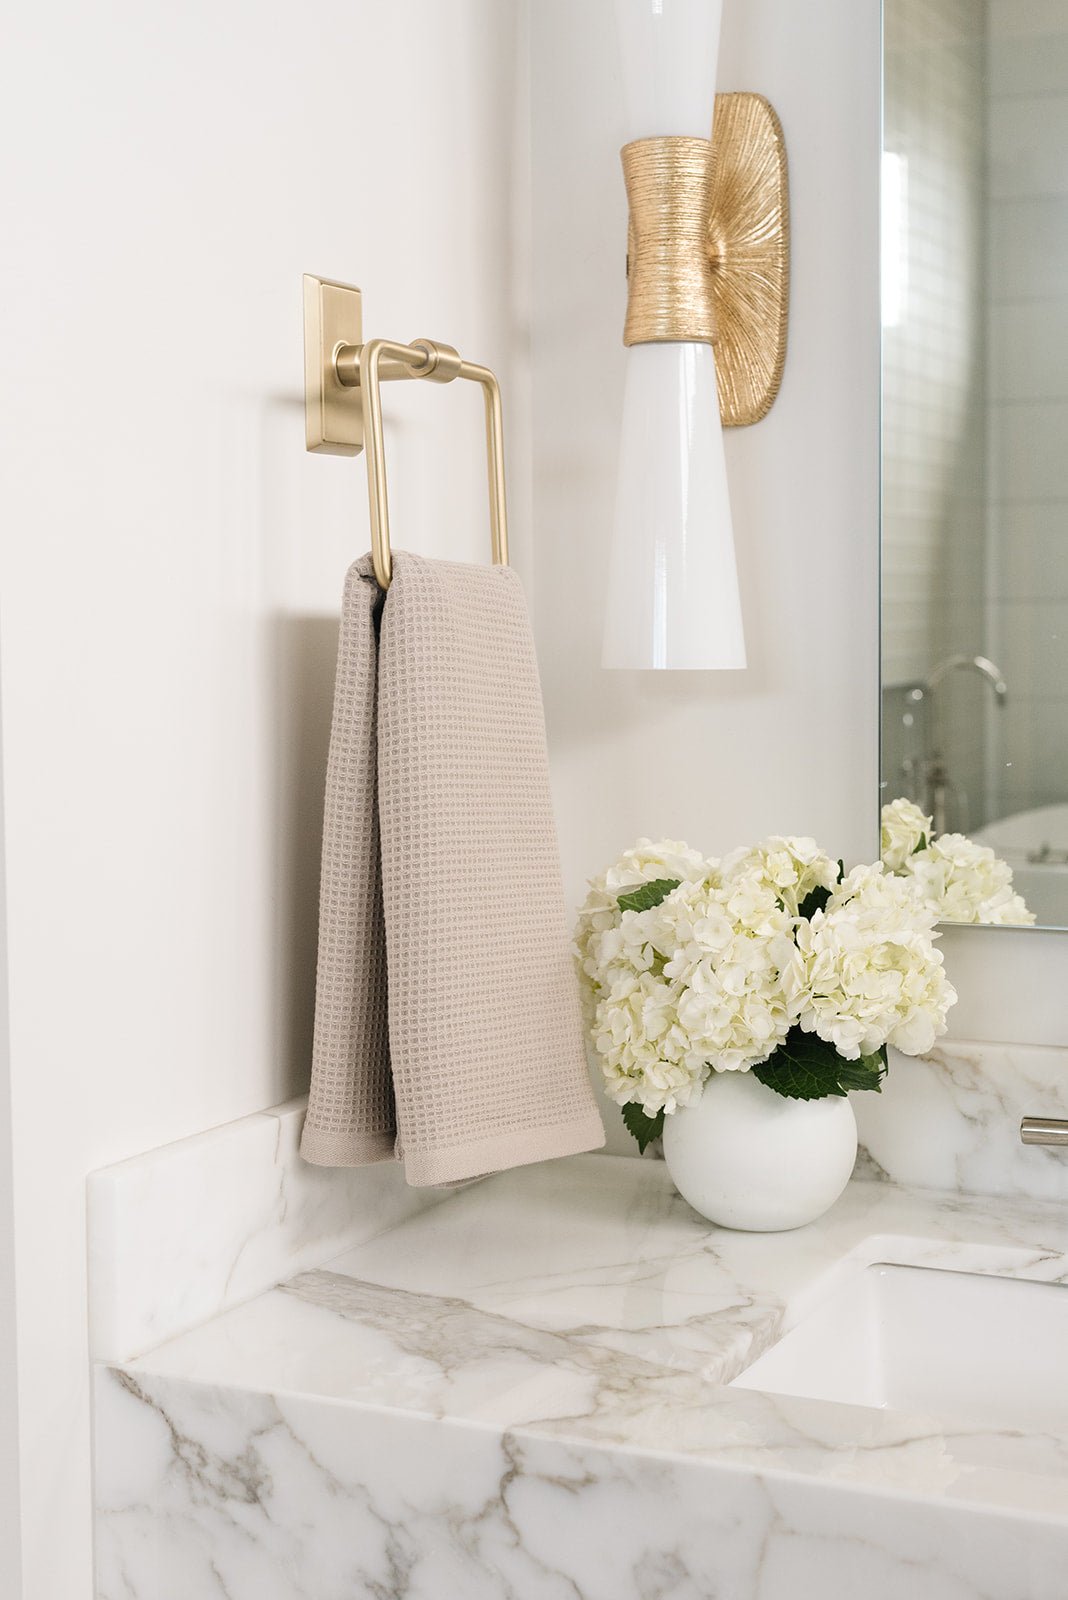 Sand Waffle Hand Towel hanging from a gold towel ring.  The photo was taken at a white marble bathroom sink. 